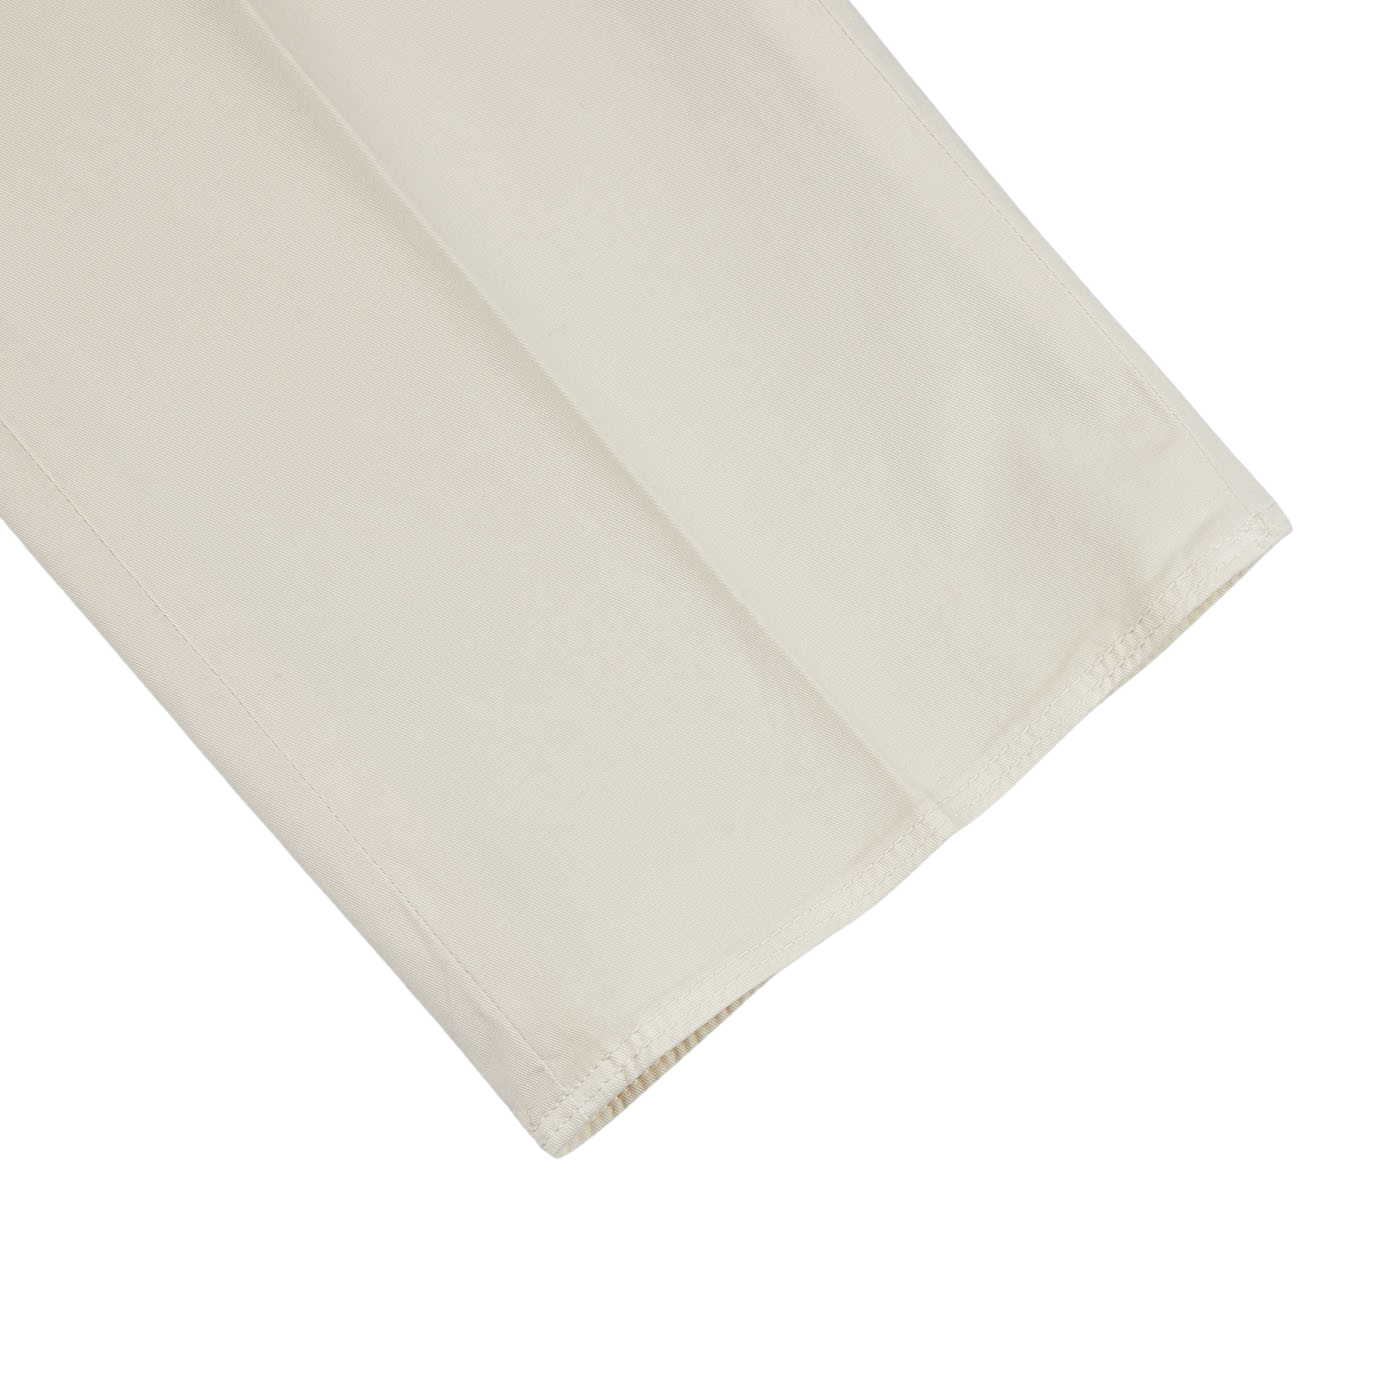 A pair of Incotex Light Beige Cotton Stretch Regular Chinos, elegantly displayed on a white surface.